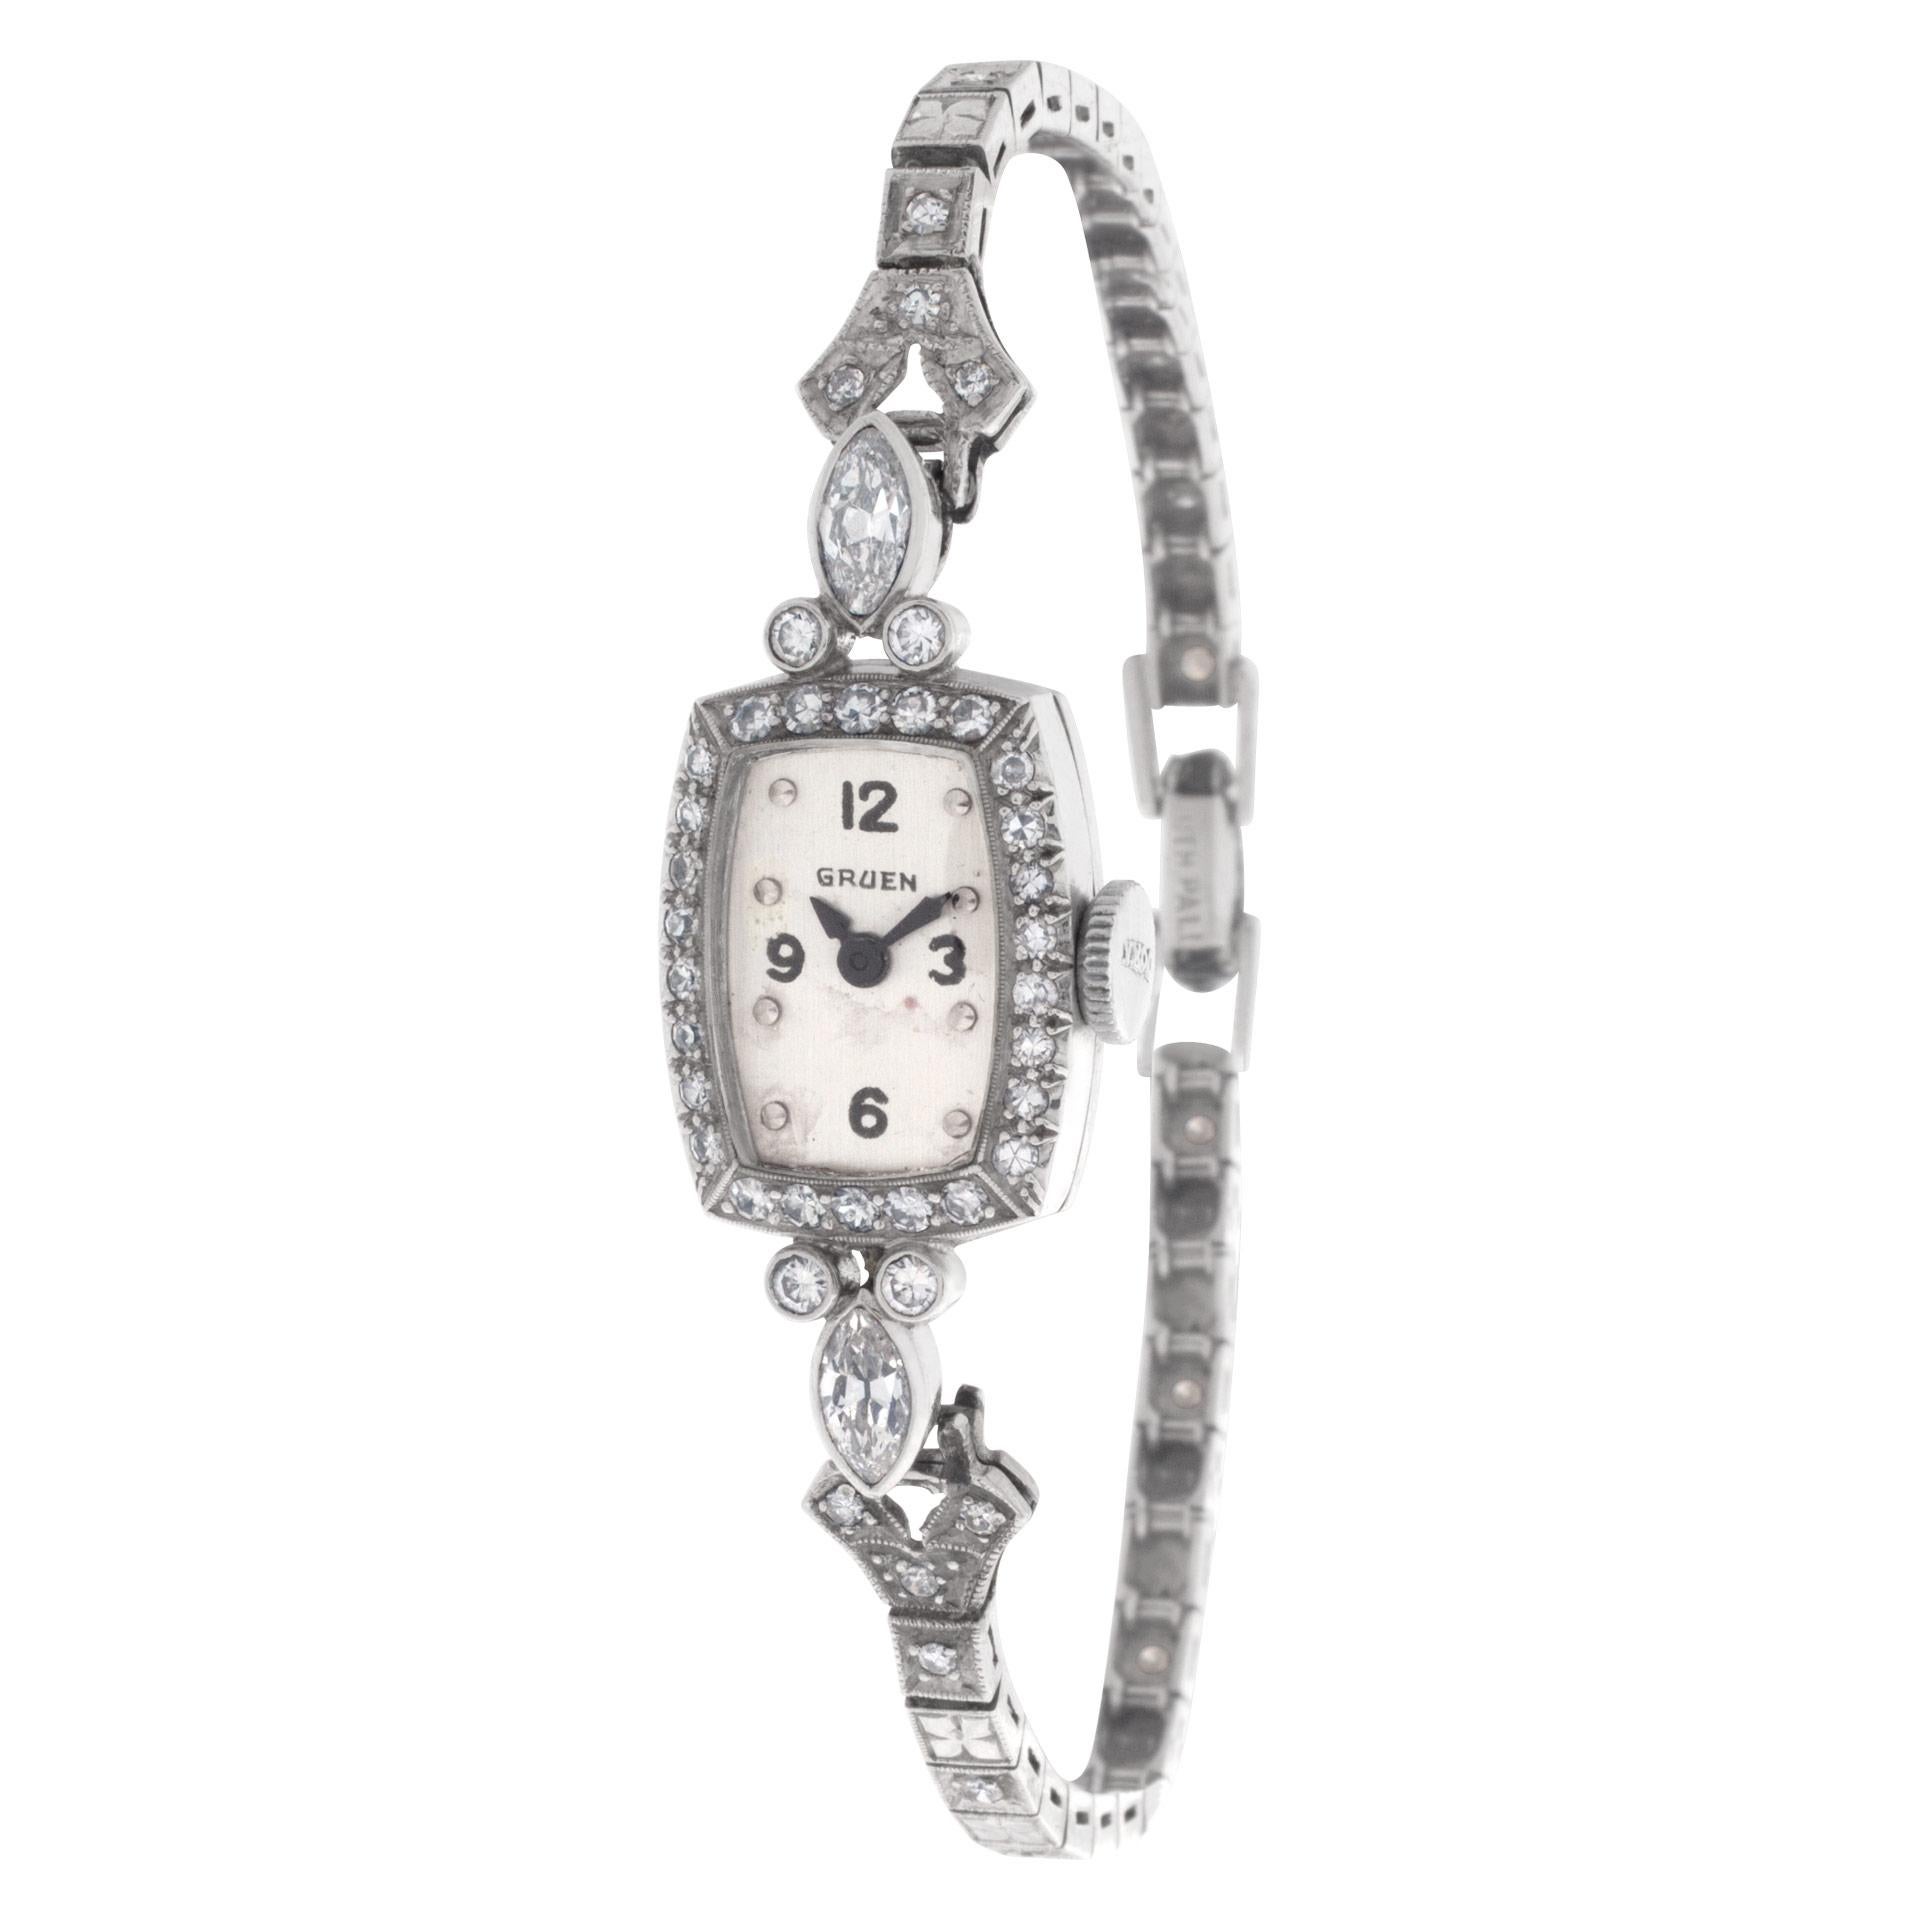 Gruen Classic in platinum with 2 carats of diamonds (marquee and round) in the bezel and  bracelet. Manual wind movement. Fits 6 inches wrist. 13.8 mm case size. Circa 1935 Fine Pre-owned Gruen Watch.   Certified preowned Vintage Gruen Classic watch